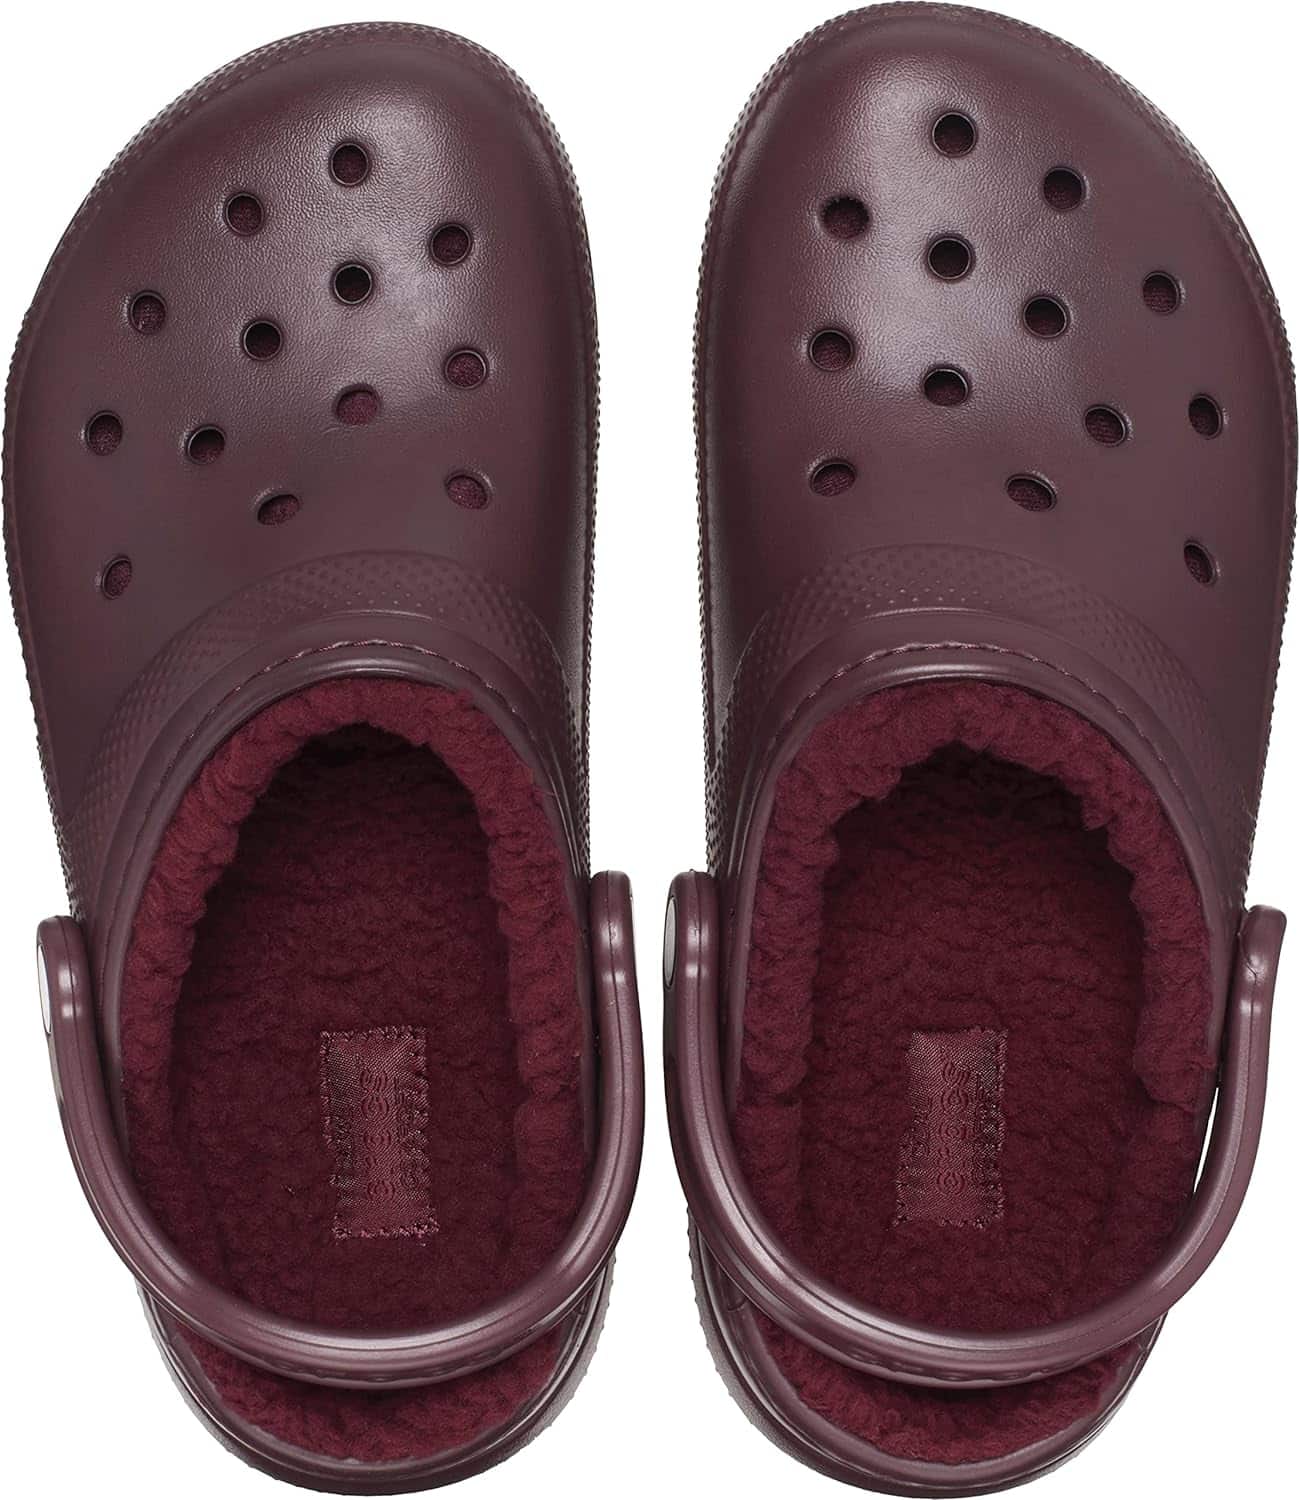 Crocs Classic Lined Clog: A Comfortable and Versatile Footwear Choice